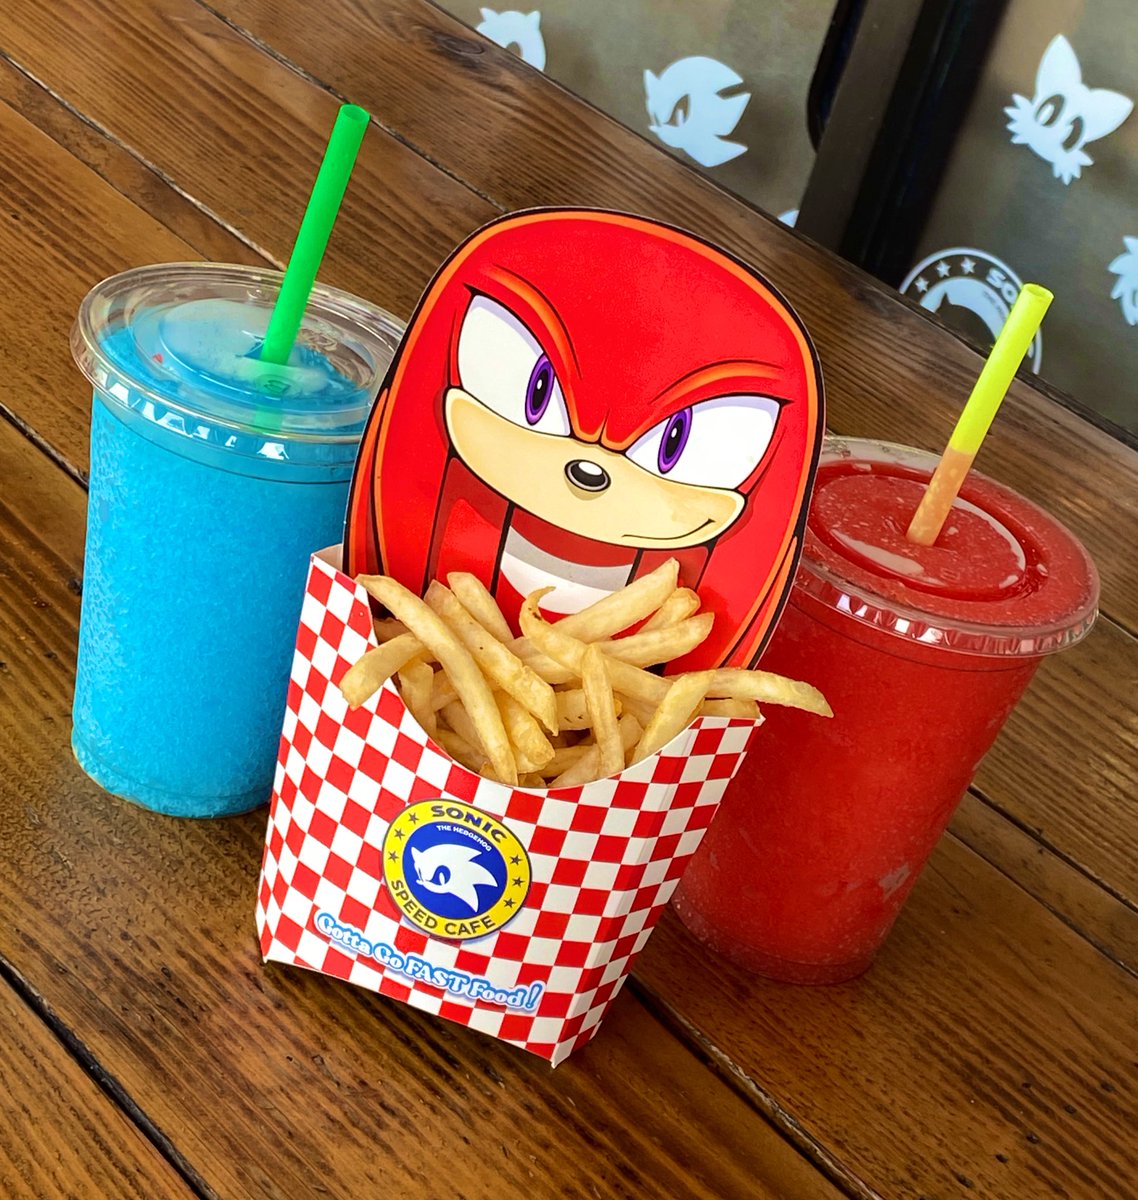 at the sonic cafe pop-up with cheri and dani hehehe!